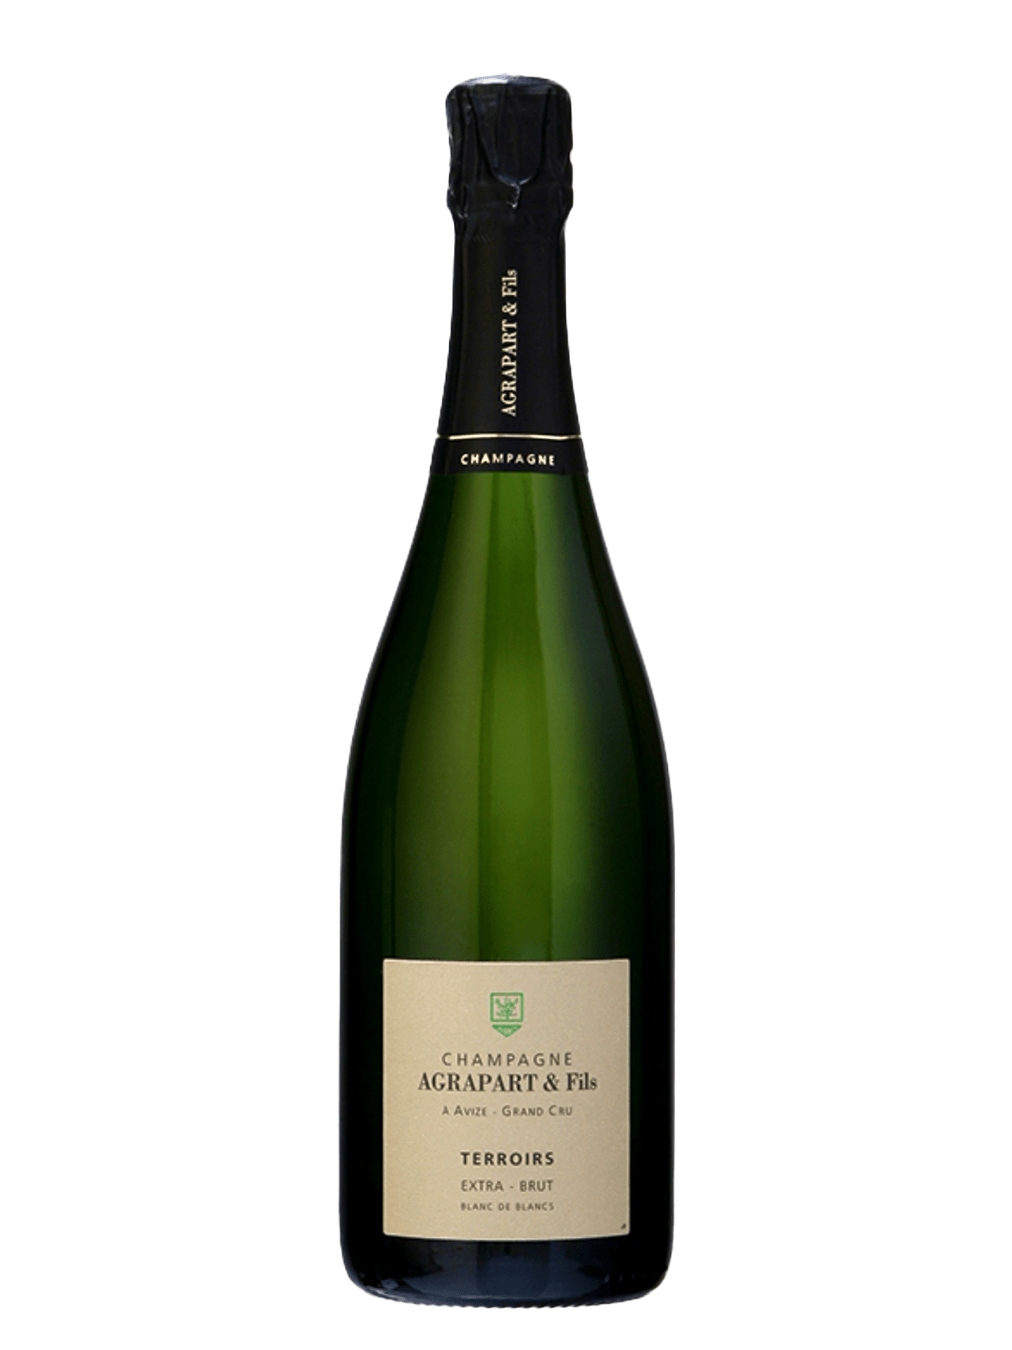 Shop Champagne Agrapart & Fils Champagne Agrapart & Fils Terroirs Blanc de Blancs Grand Cru Extra Brut NV online at PENTICTON artisanal French wine store in Hong Kong. Discover other French wines, promotions, workshops and featured offers at pentictonpacific.com 